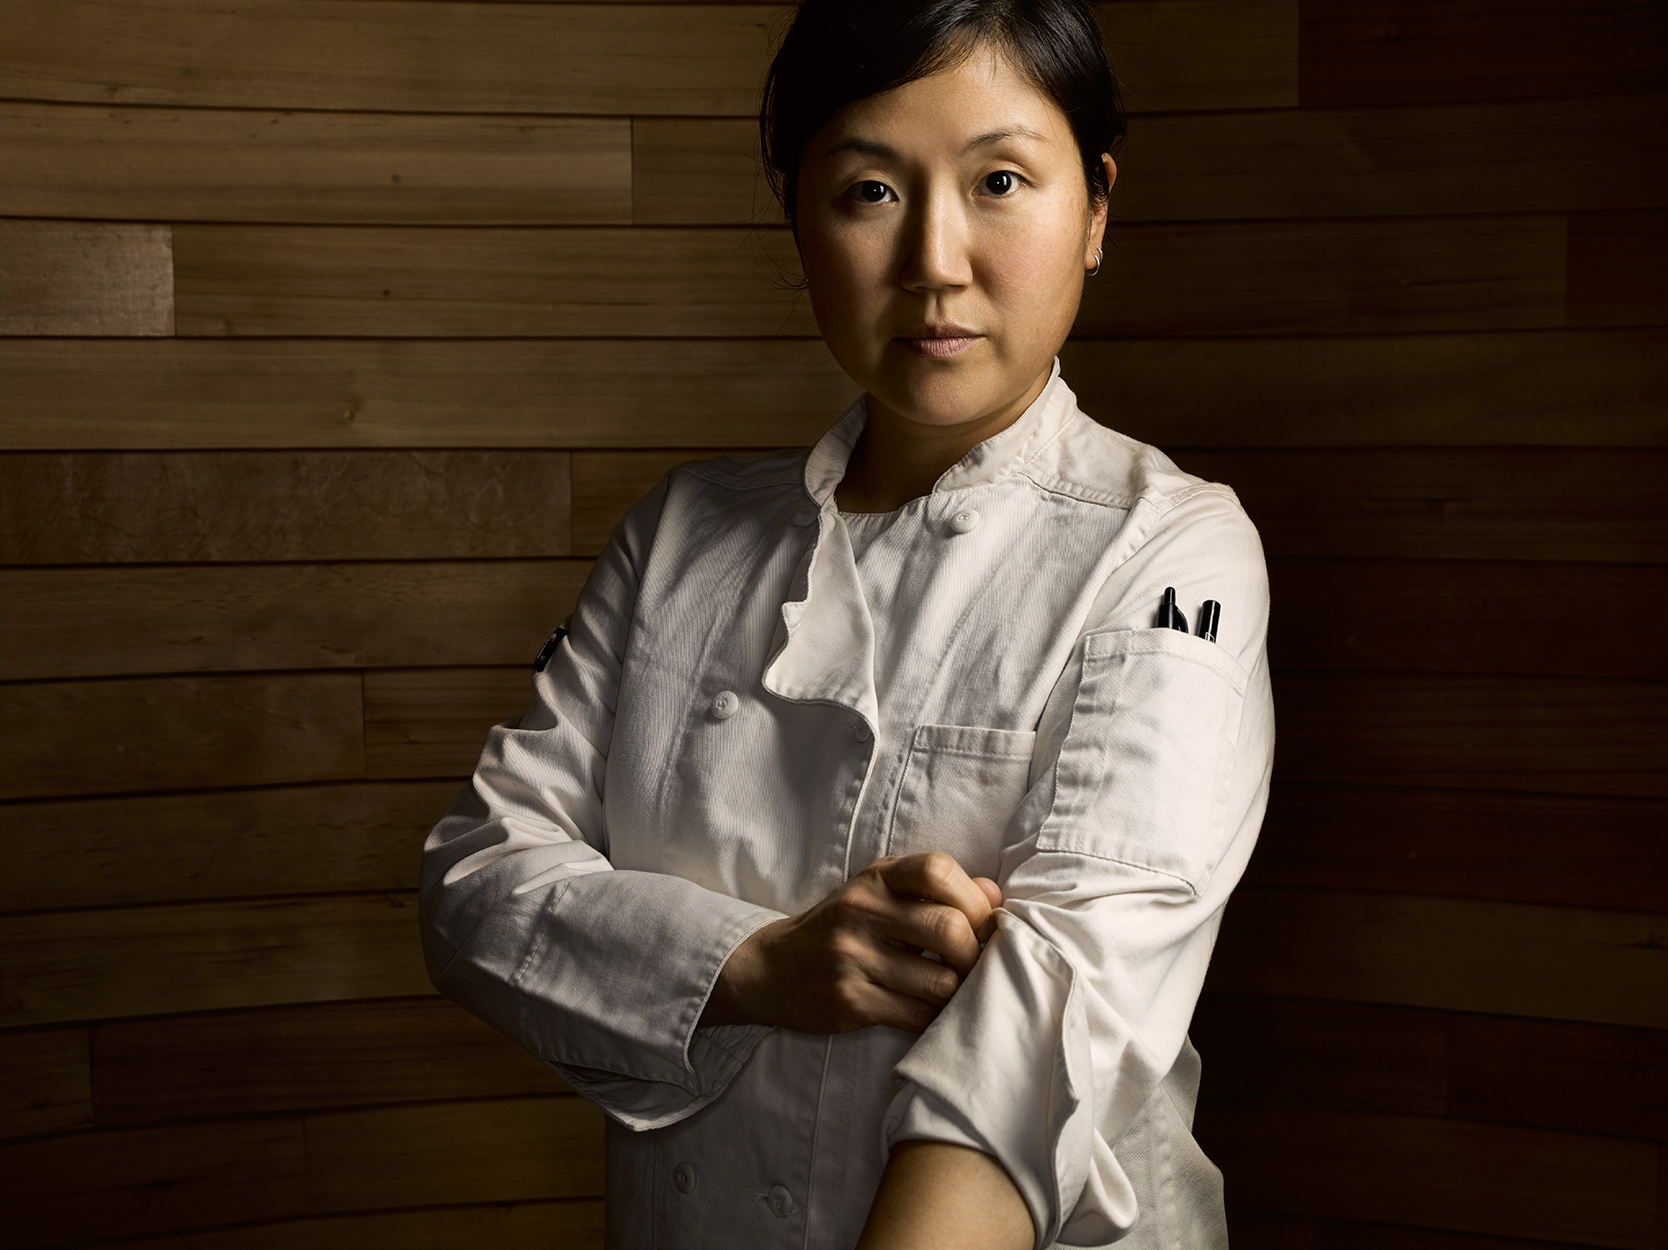 Sohui Kim is the chef and owner of The Good Fork and Insa in Brooklyn.